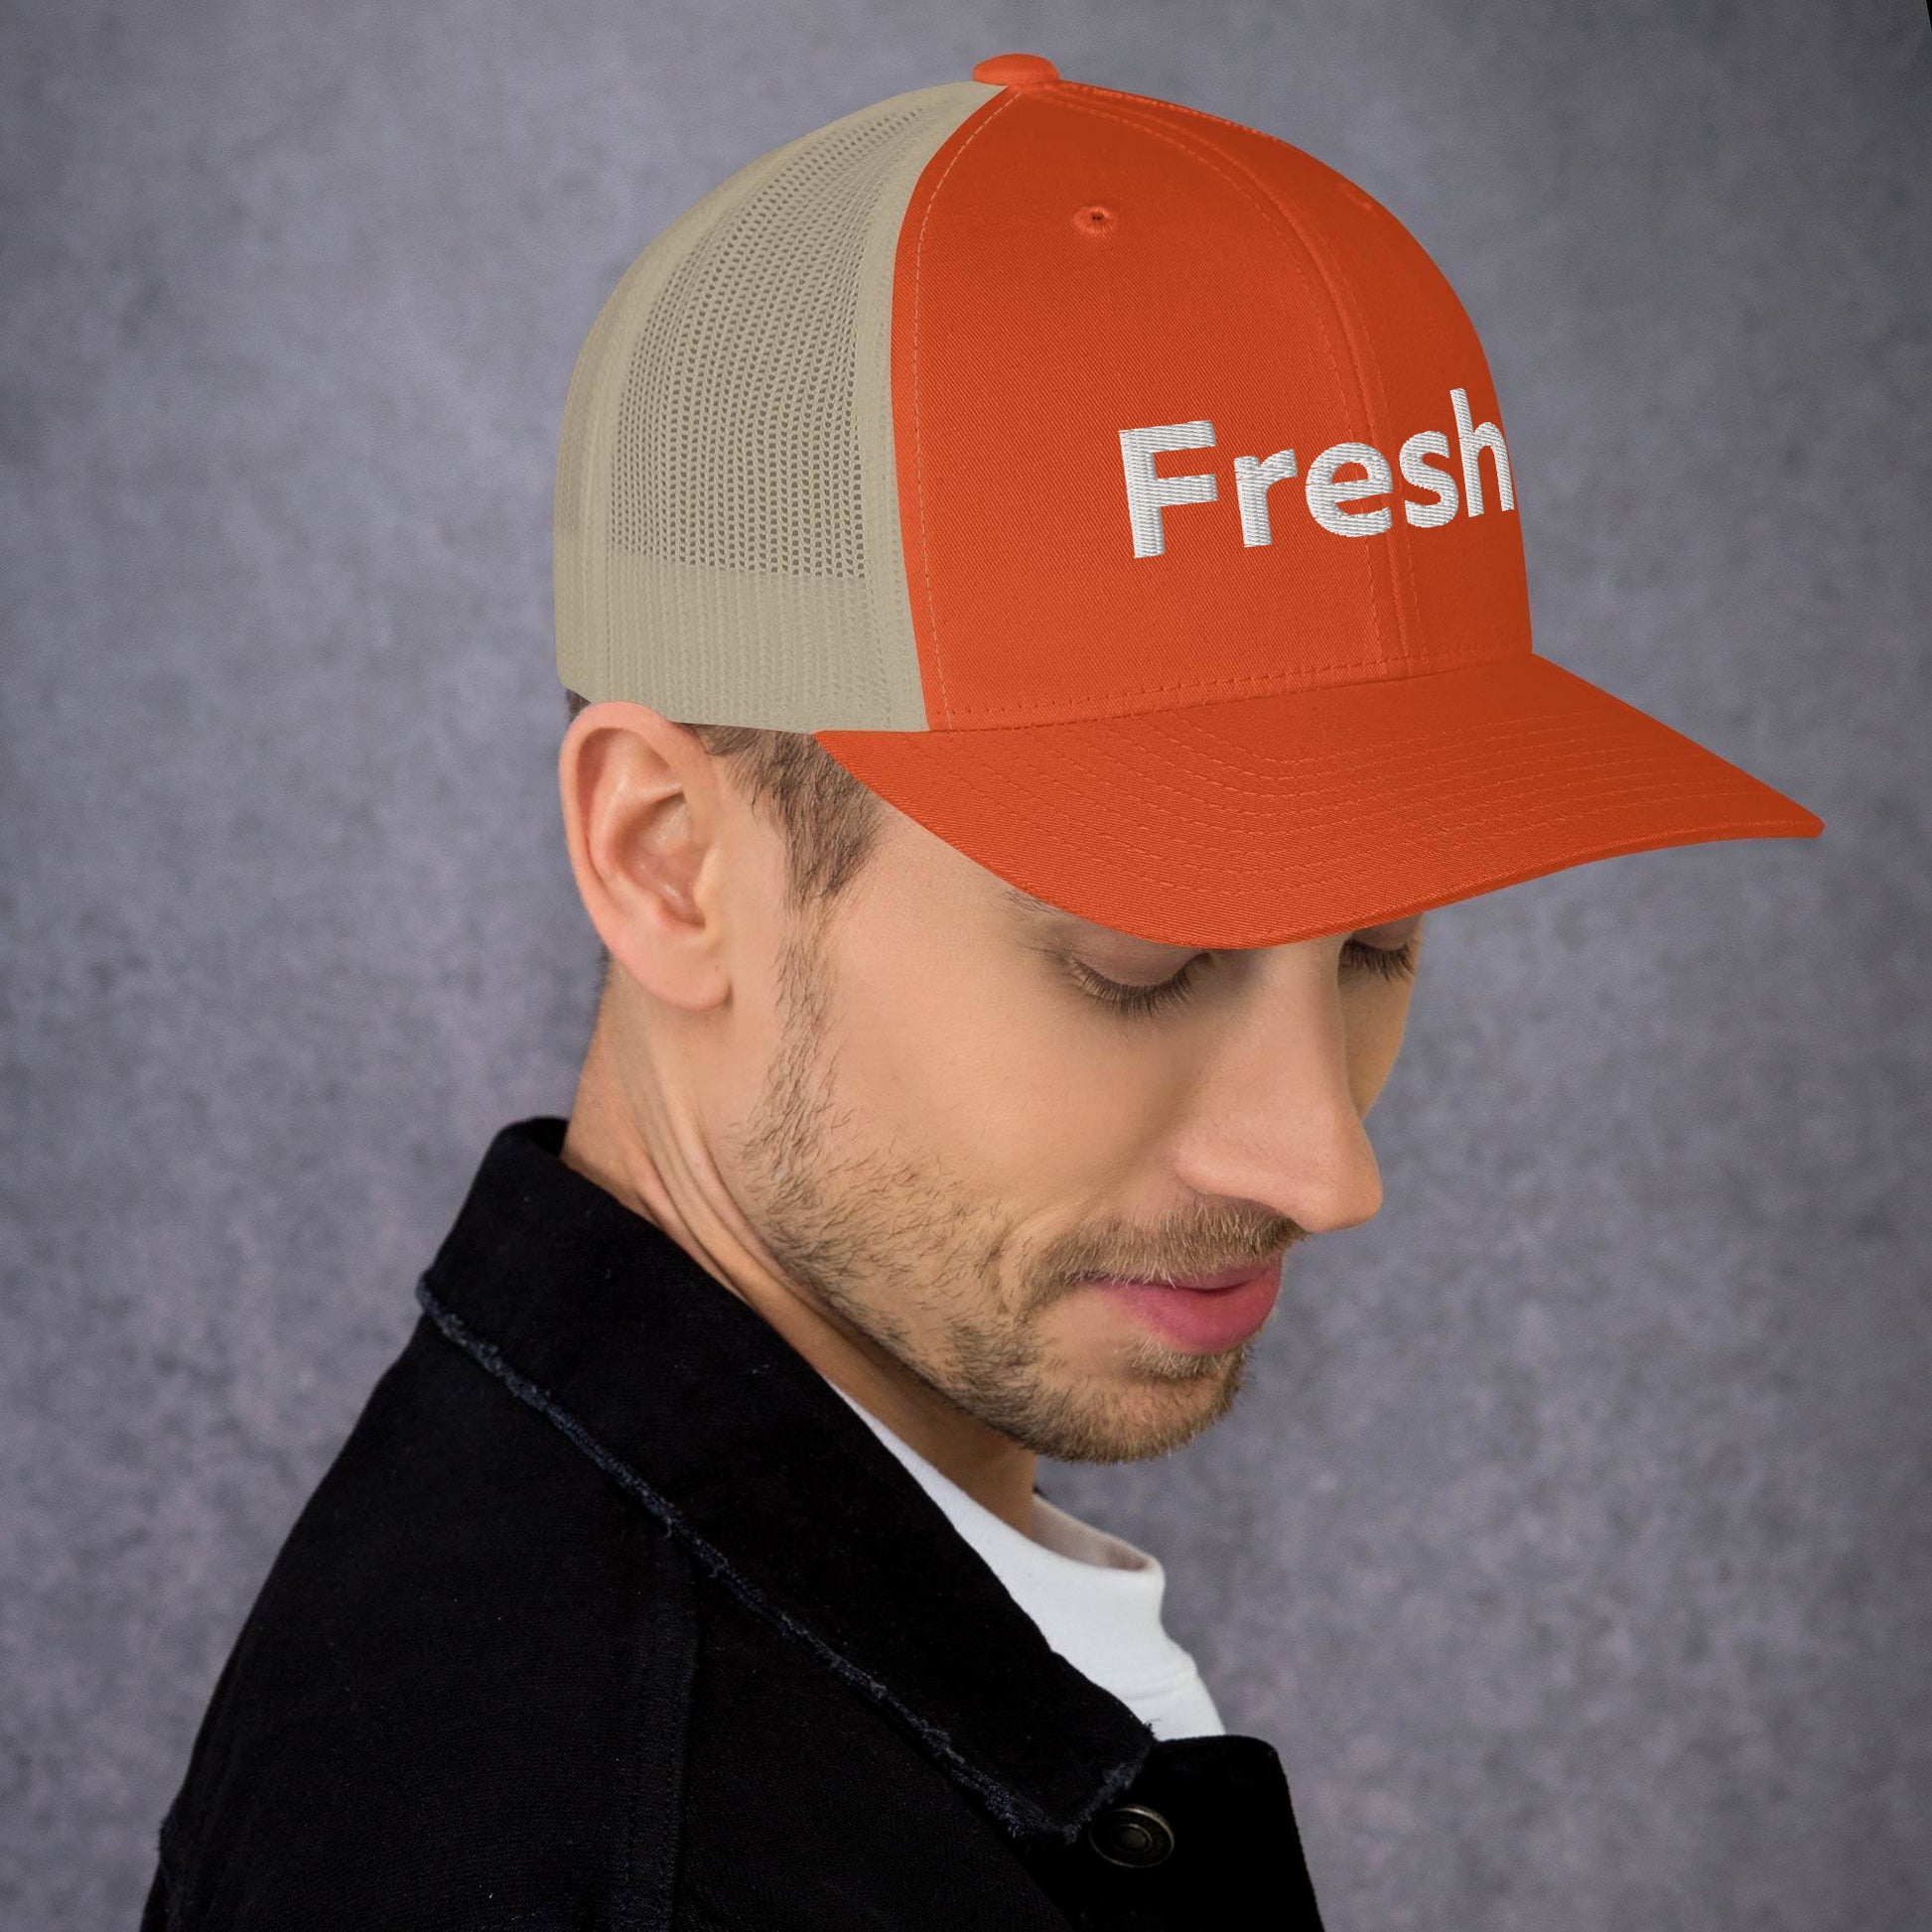 Looking for a hat that combines style and comfort? Look no further than the Fresh Hat! Color: Orange and Khaki